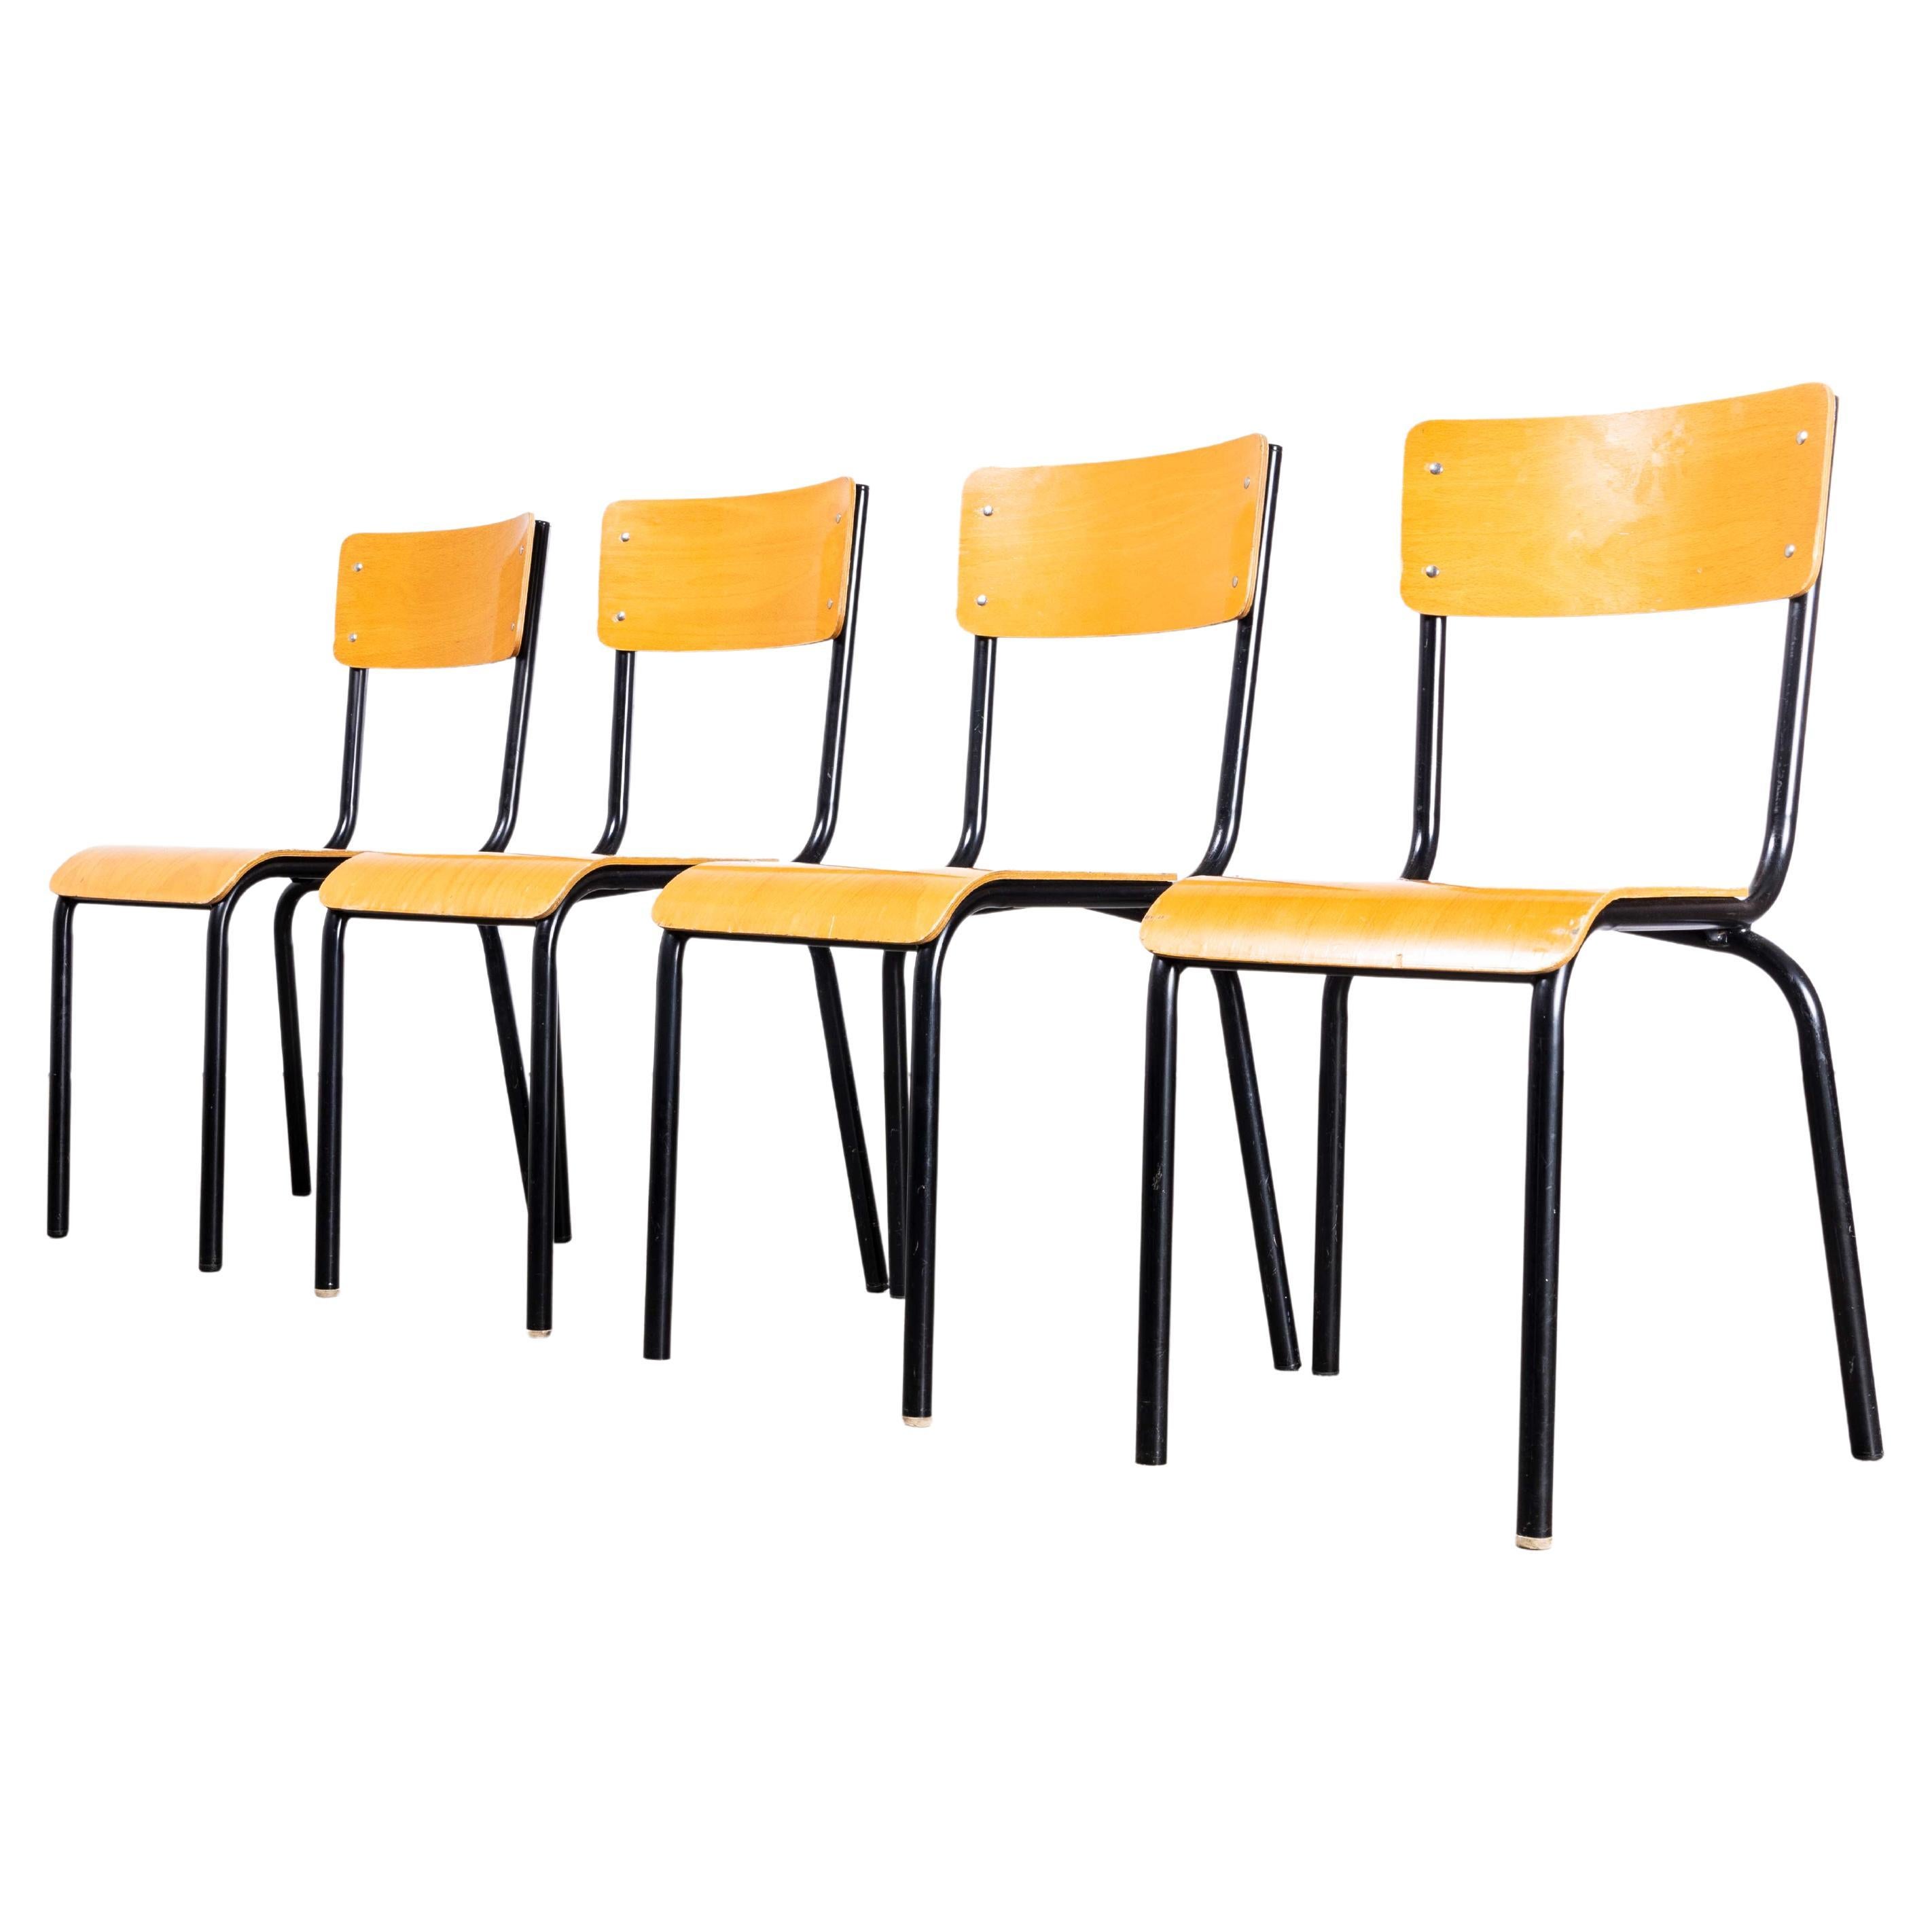 1960’s Original Black French Stacking University Chairs Wide Back - Set Of Four For Sale